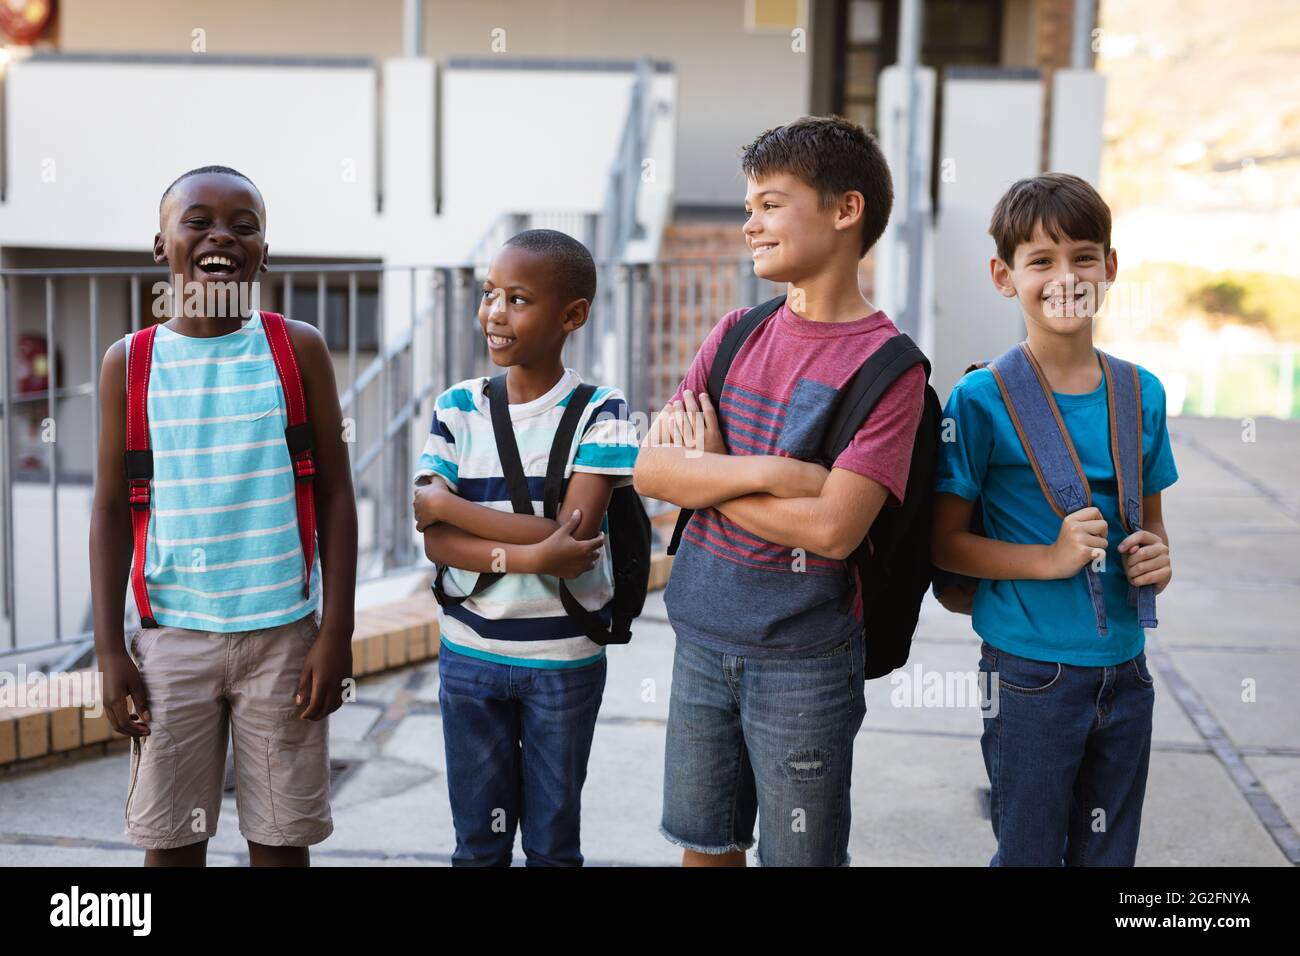 Group of diverse male students with backpacks smiling while standing at school Stock Photo